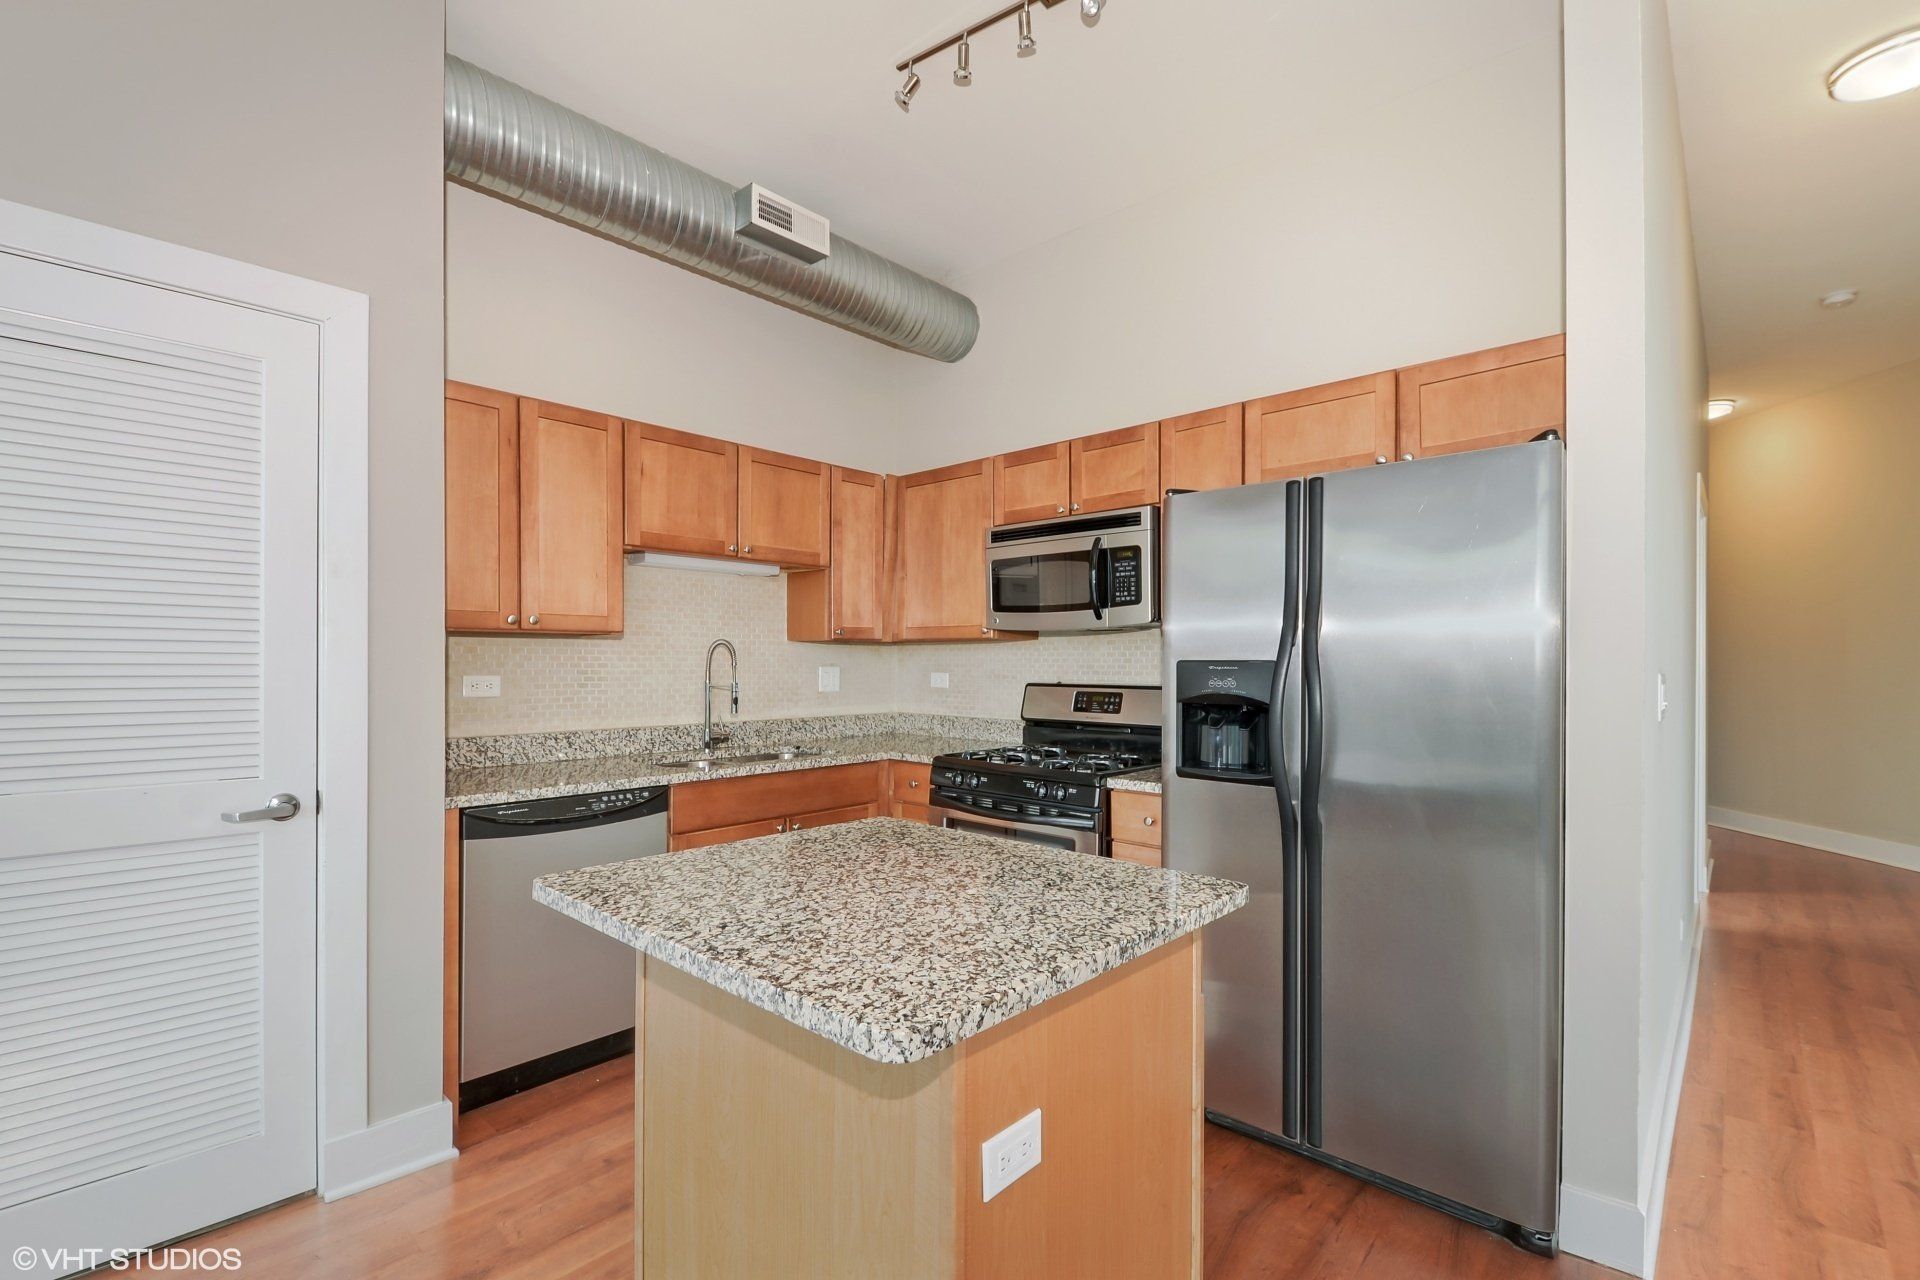 A kitchen with stainless steel appliances and granite counter tops at 2000 N Milwaukee Apartments.